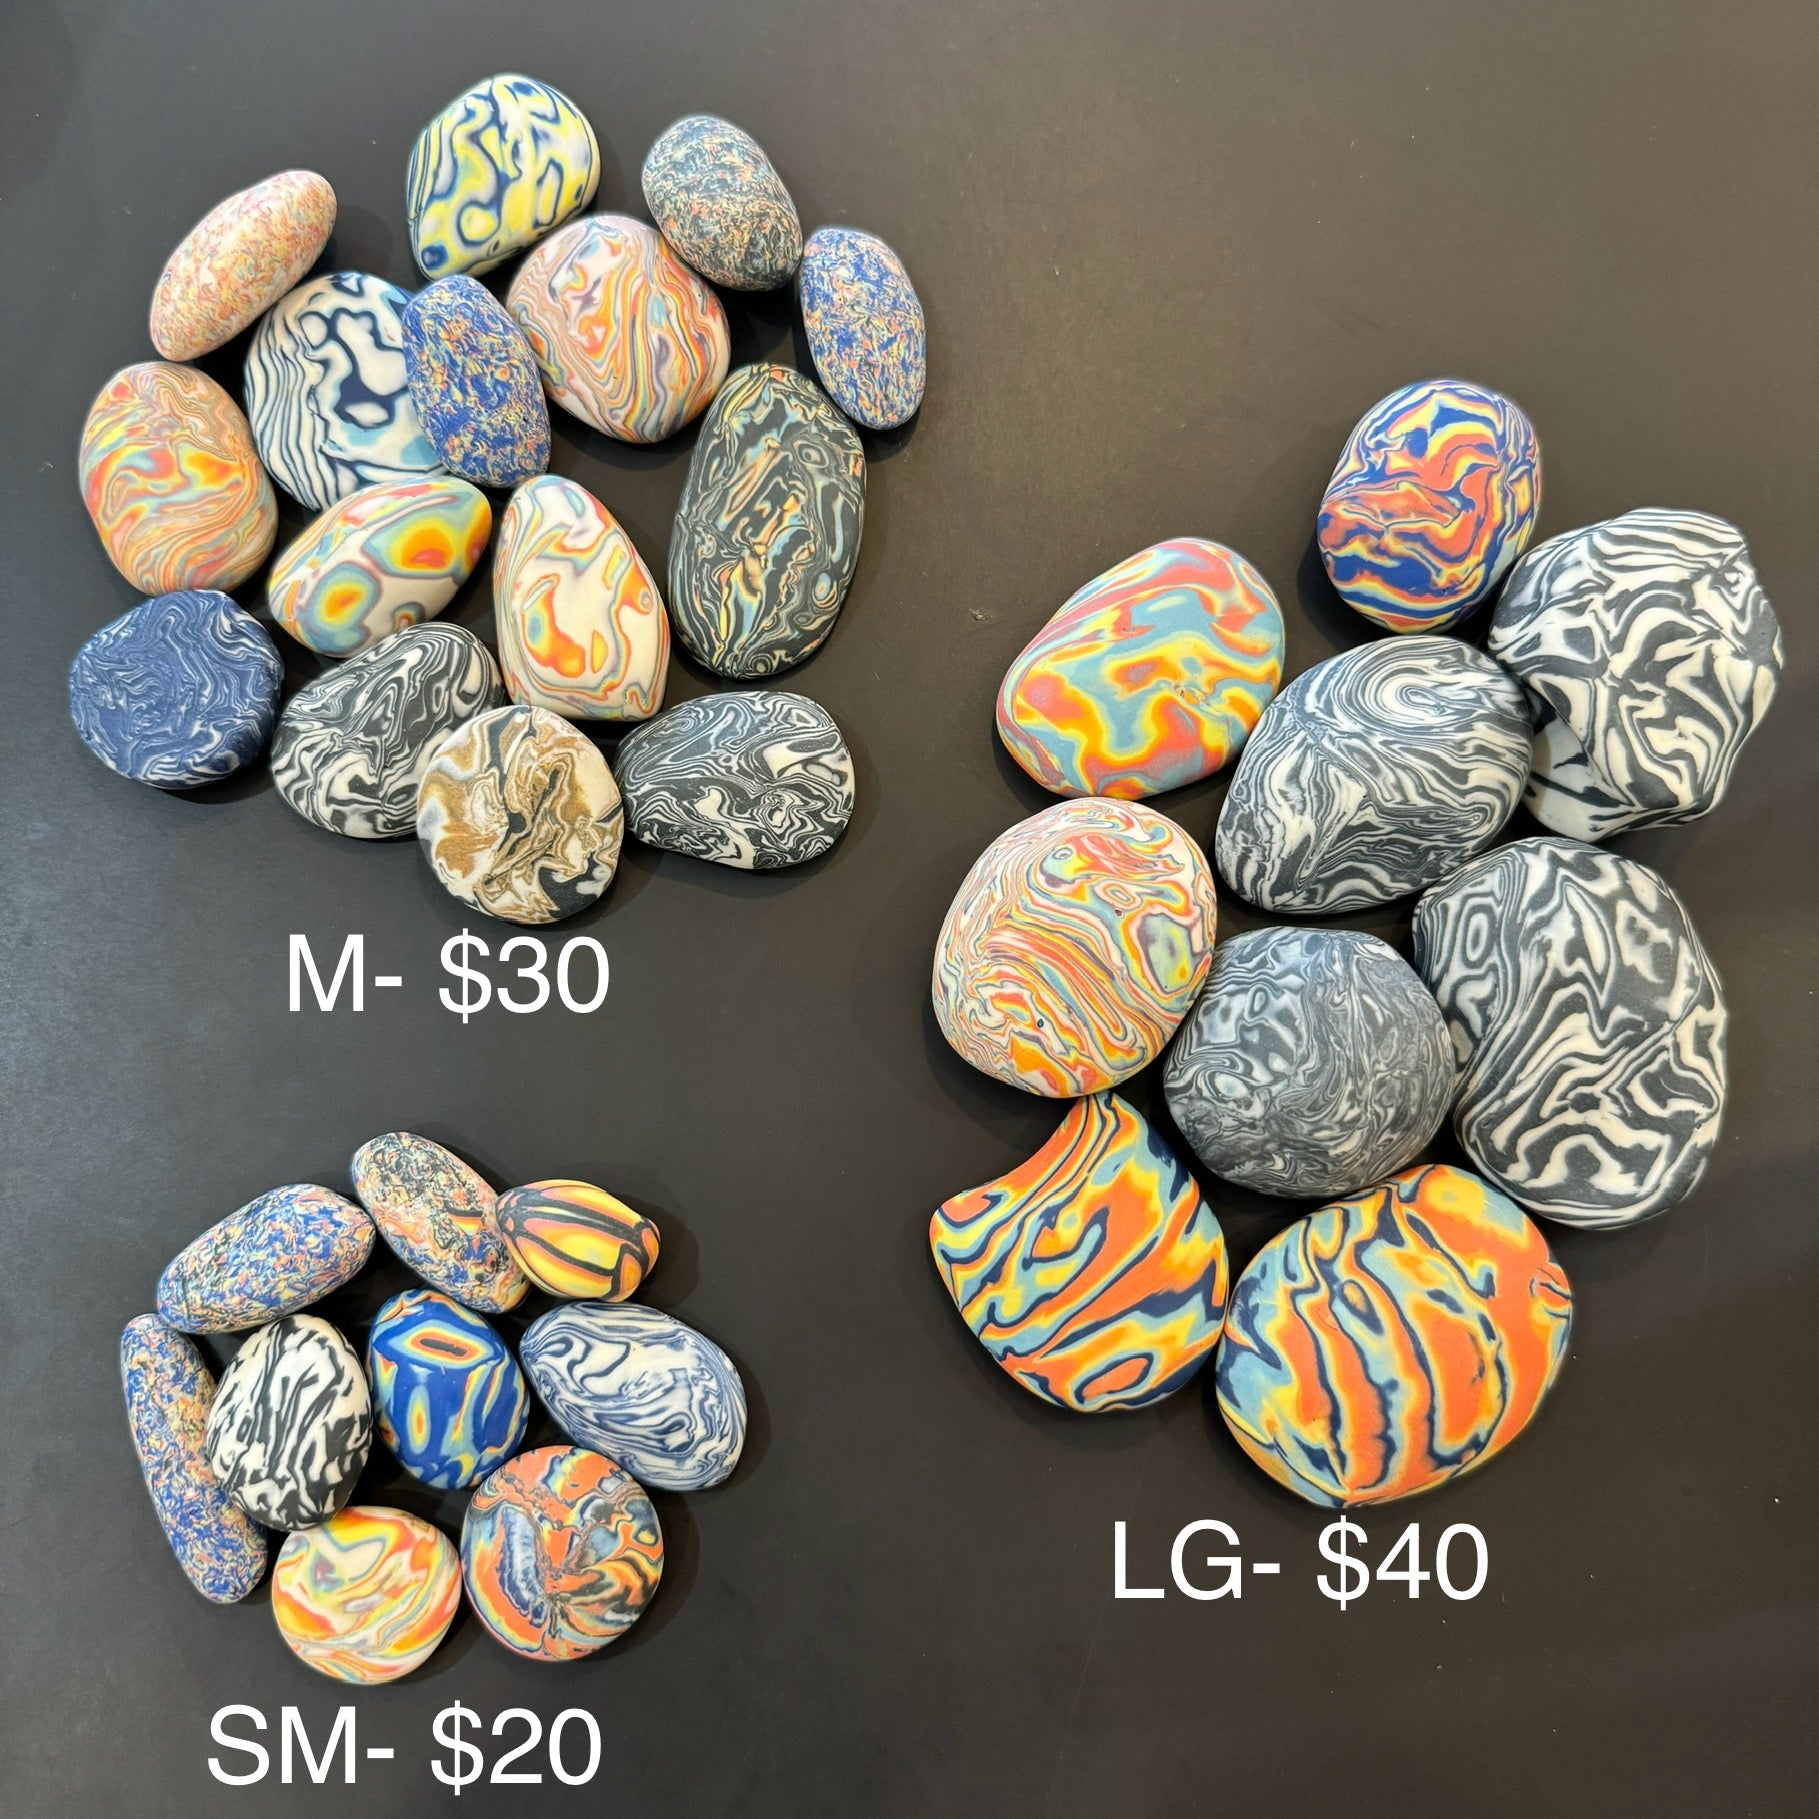 Porcelain Rock/ Worry Stone, 3 sizes - from various layering and carving processes, random grab bag product